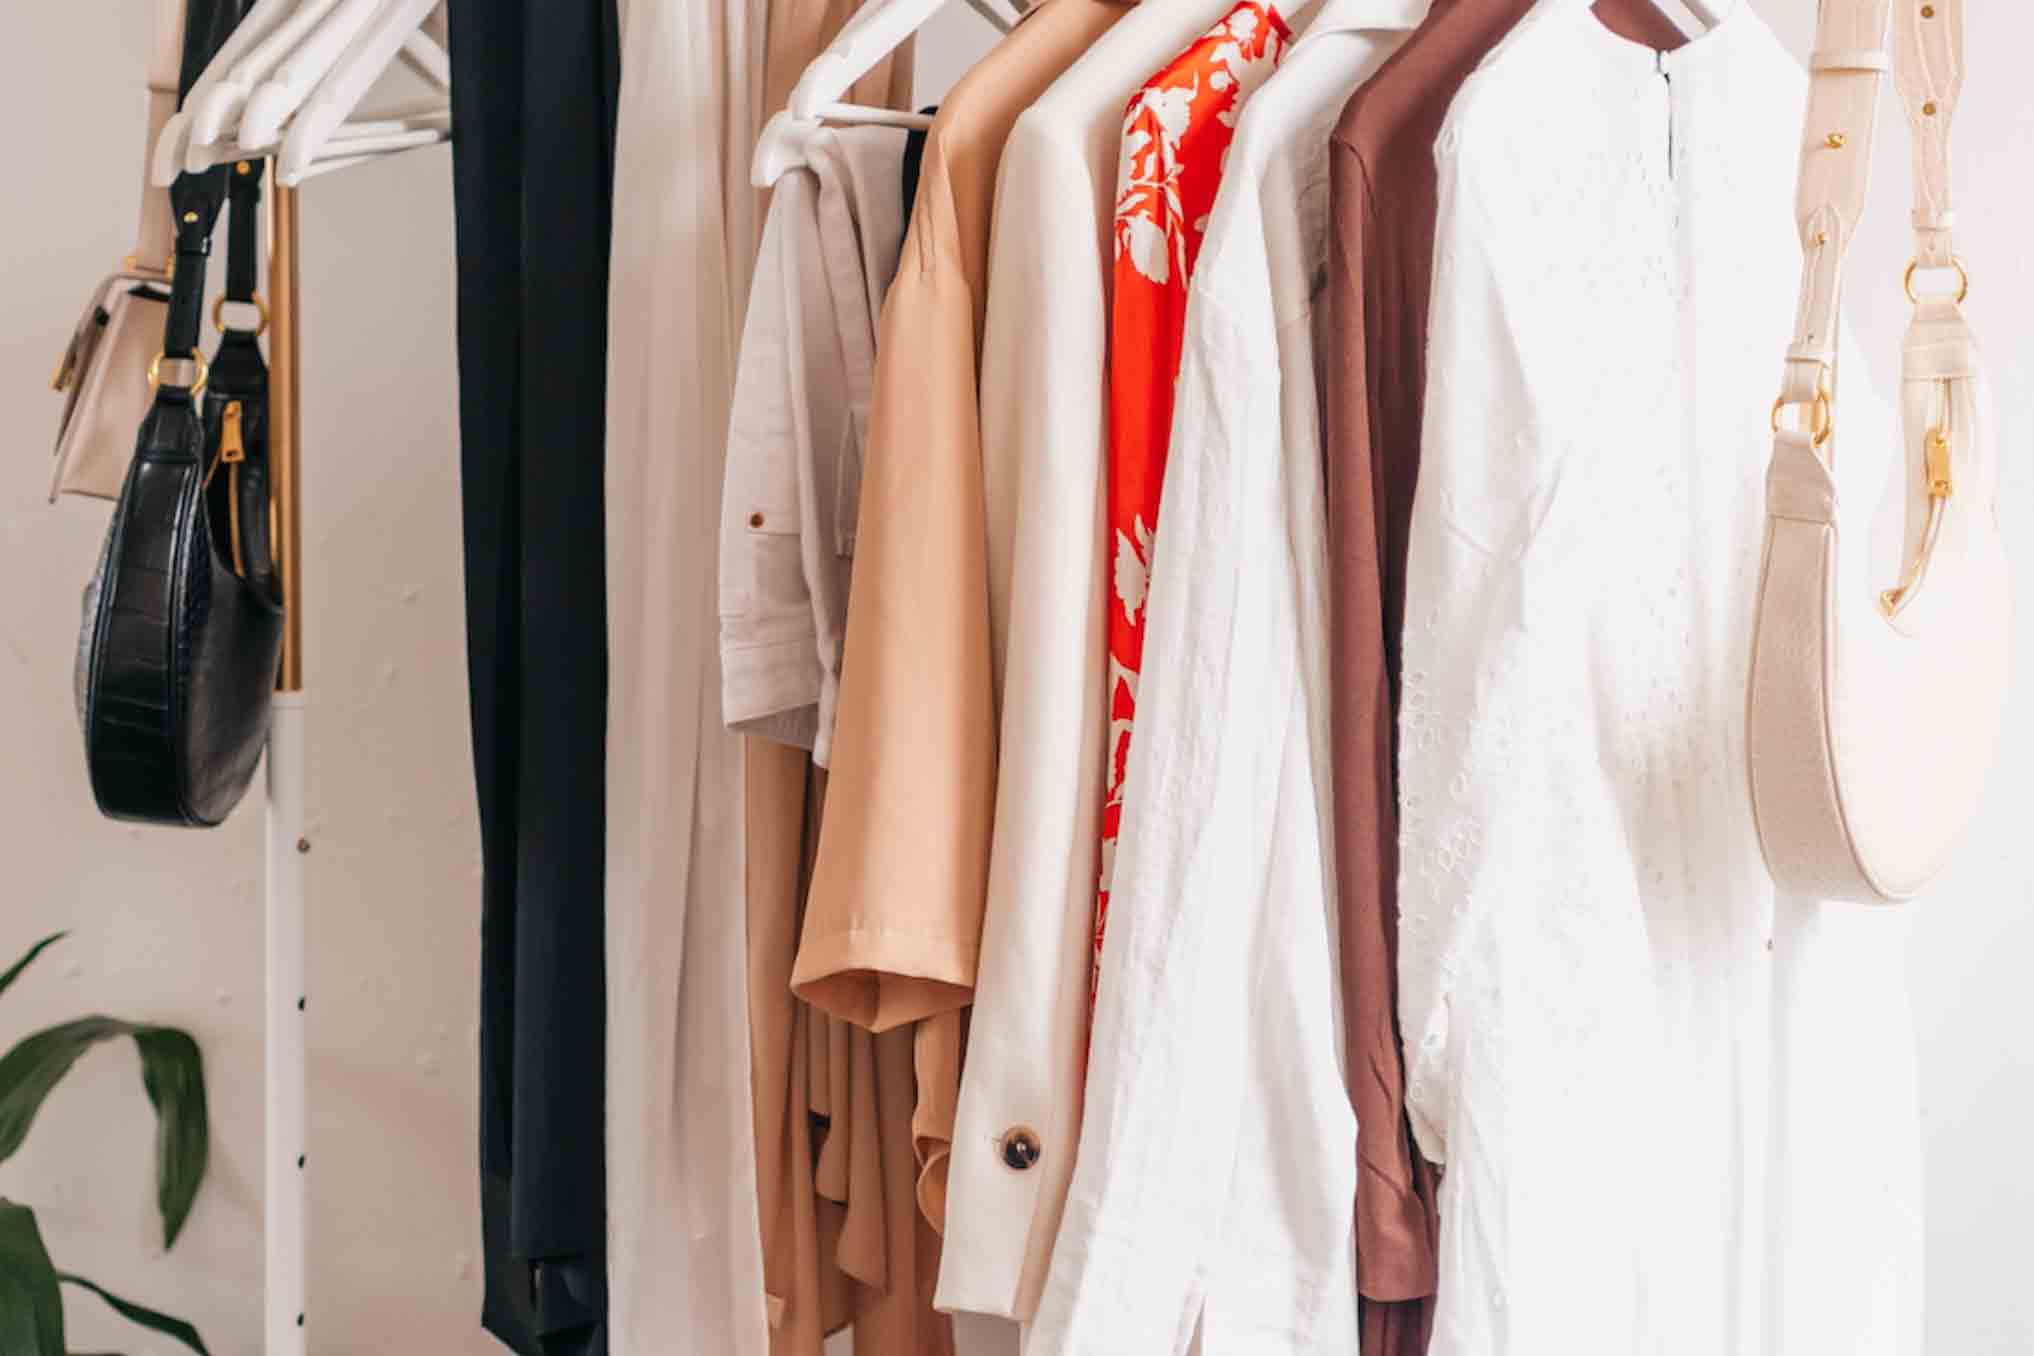 A clothing rack holding sustainable wardrobe clothing, including white red, and brown cotton shirts.